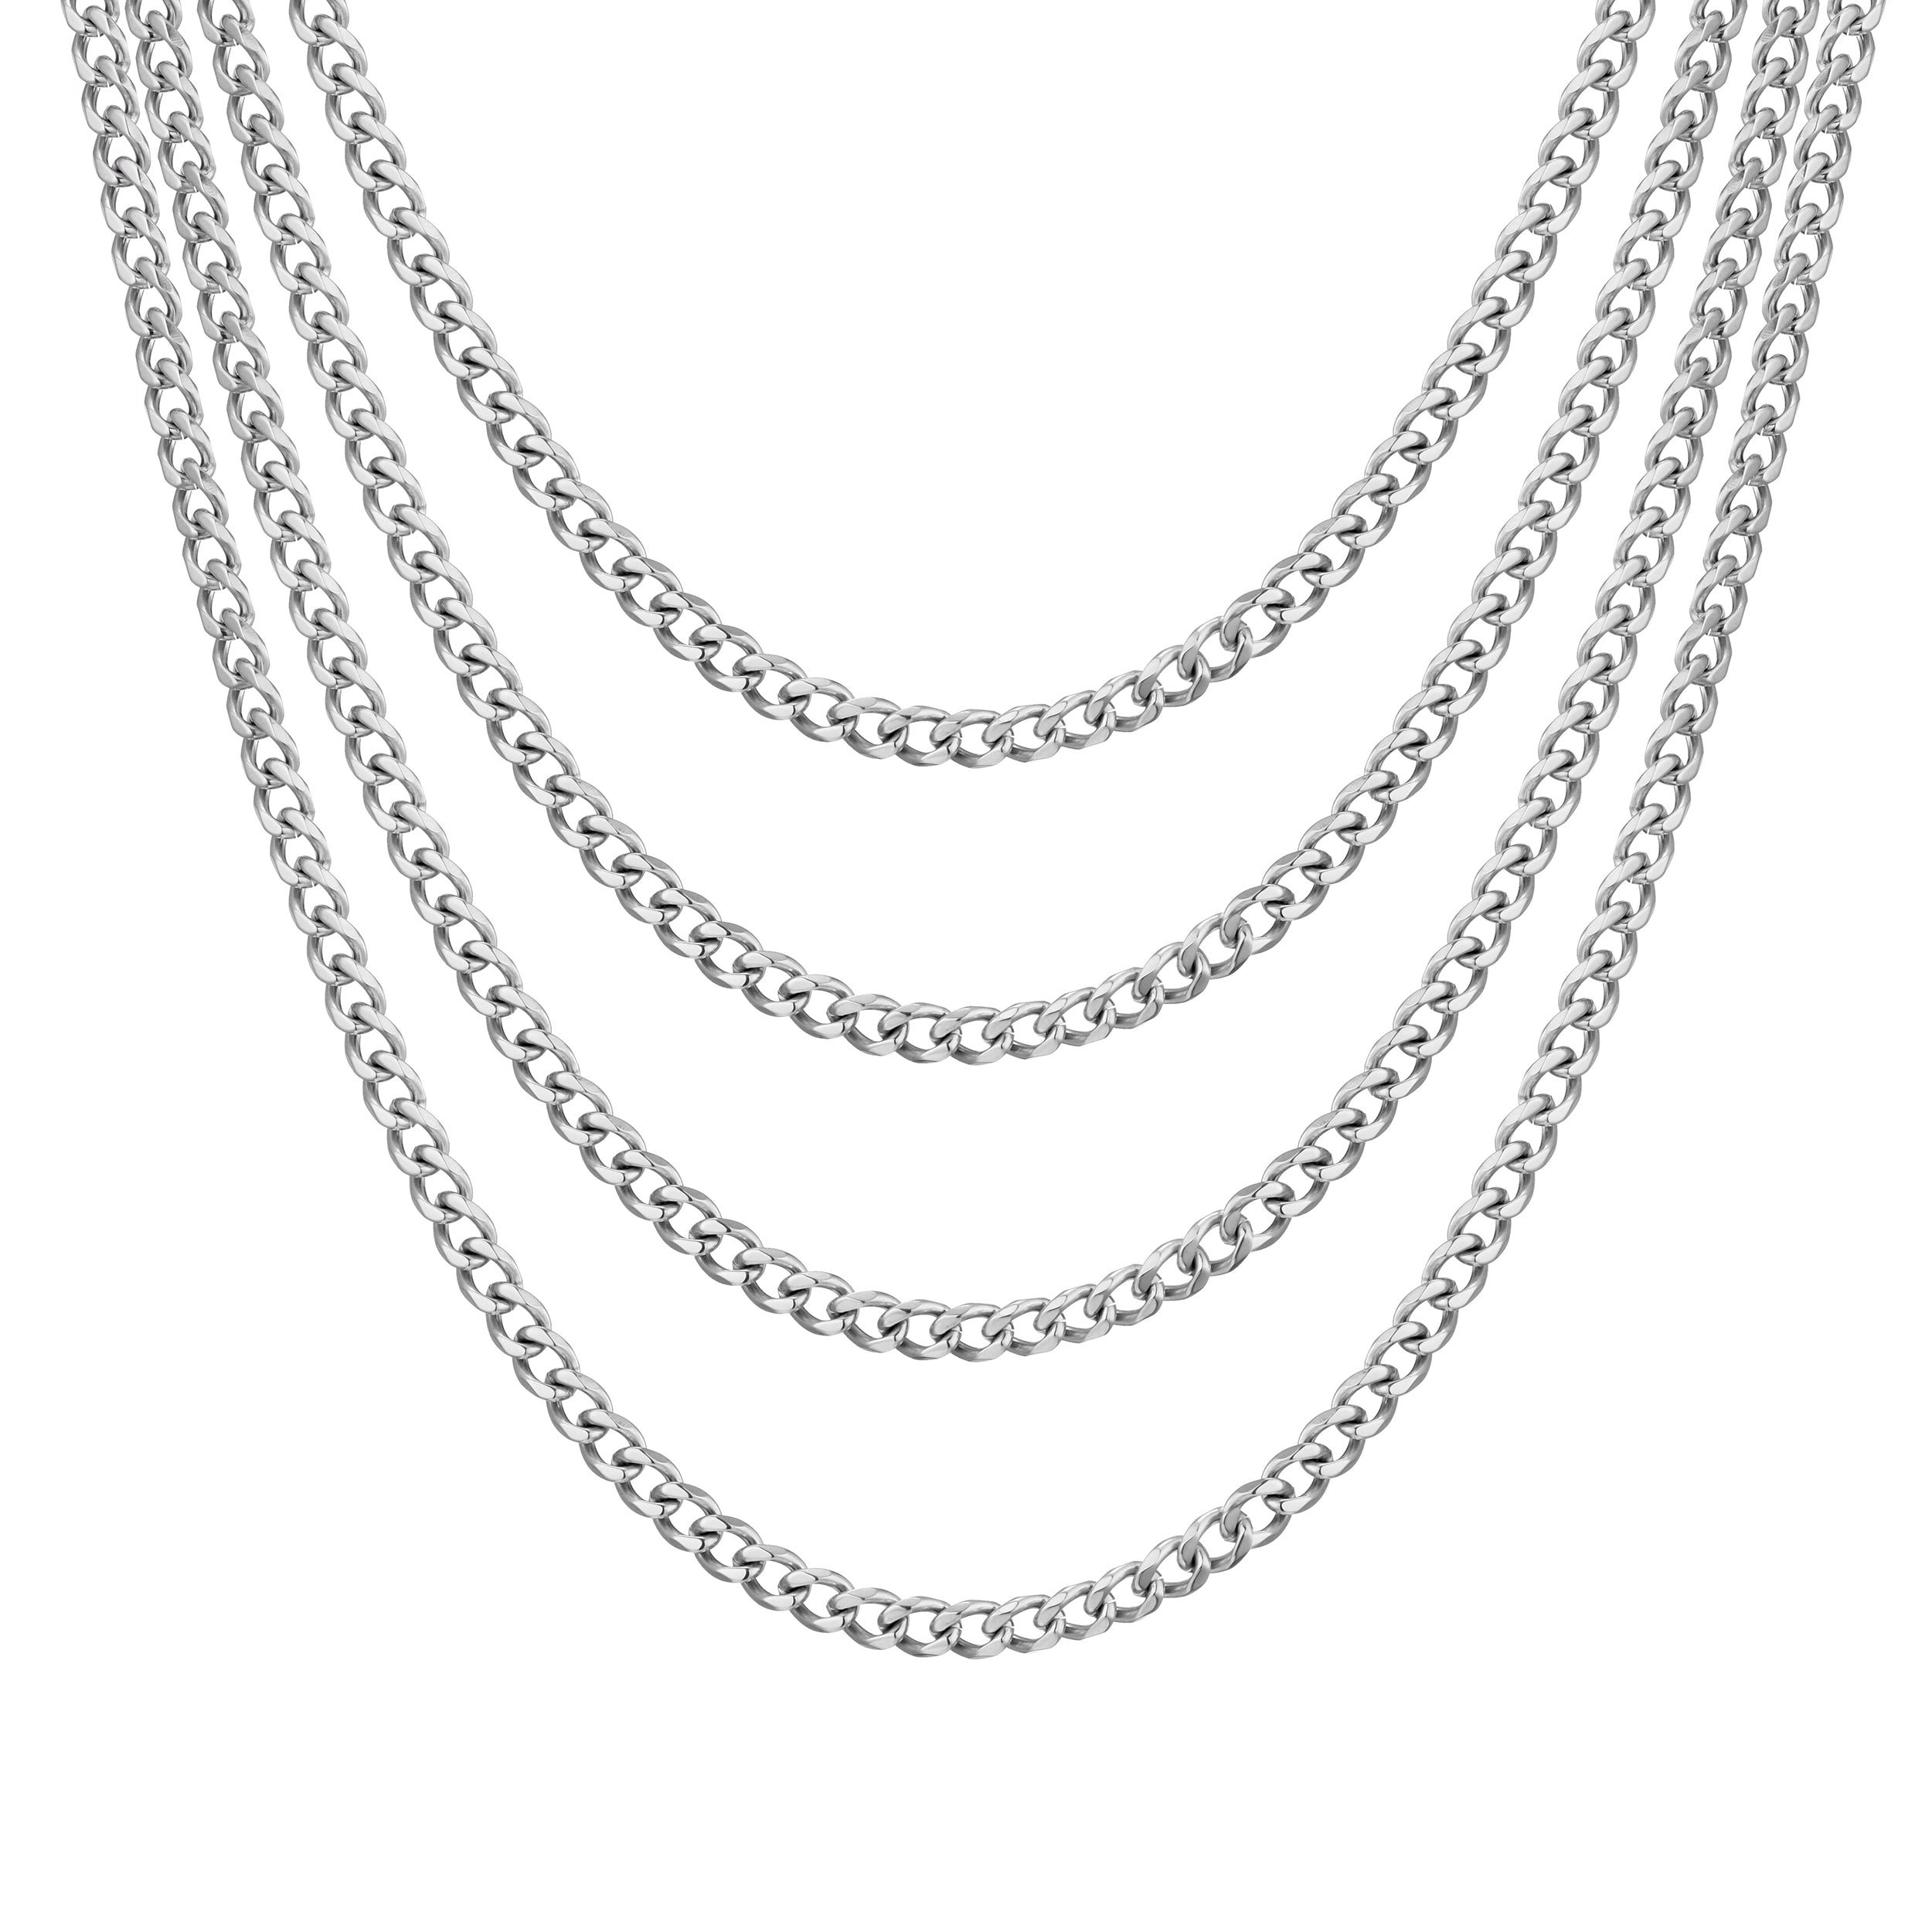 Men's 6mm Stainless Steel 18-24 Inch Curb Chain Necklace by Philip Jones Jewellery